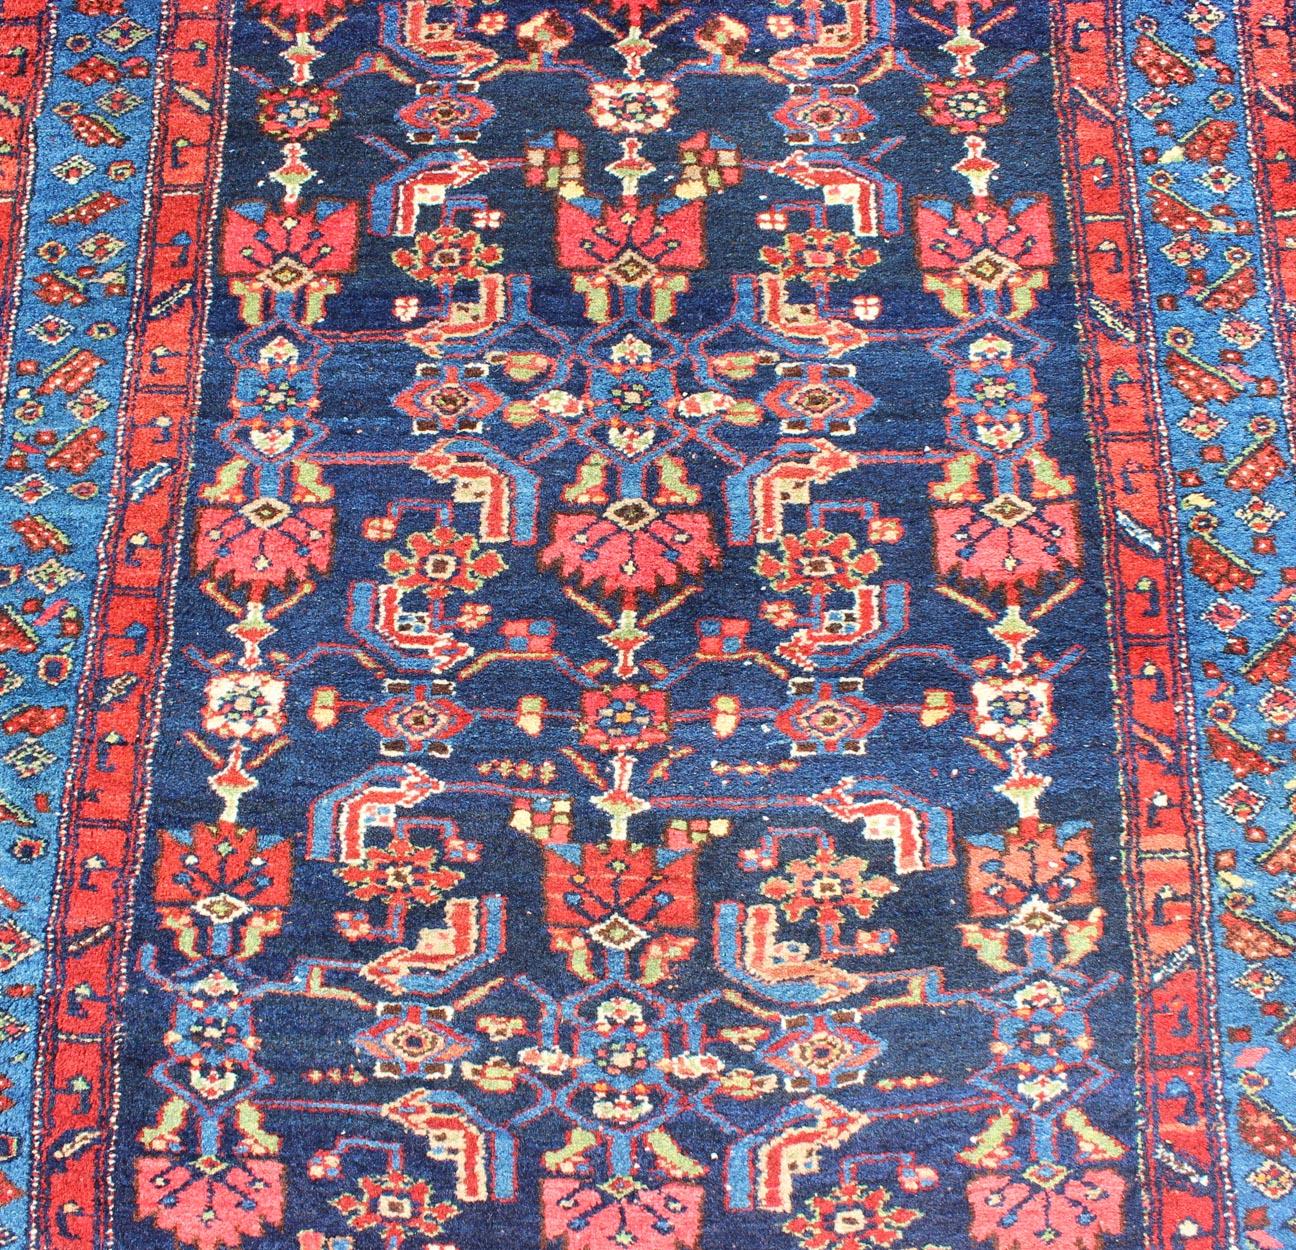 Mid-20th Century Complex Geometric Design Hamedan Vintage Runner from Persia in Multi-Colors For Sale